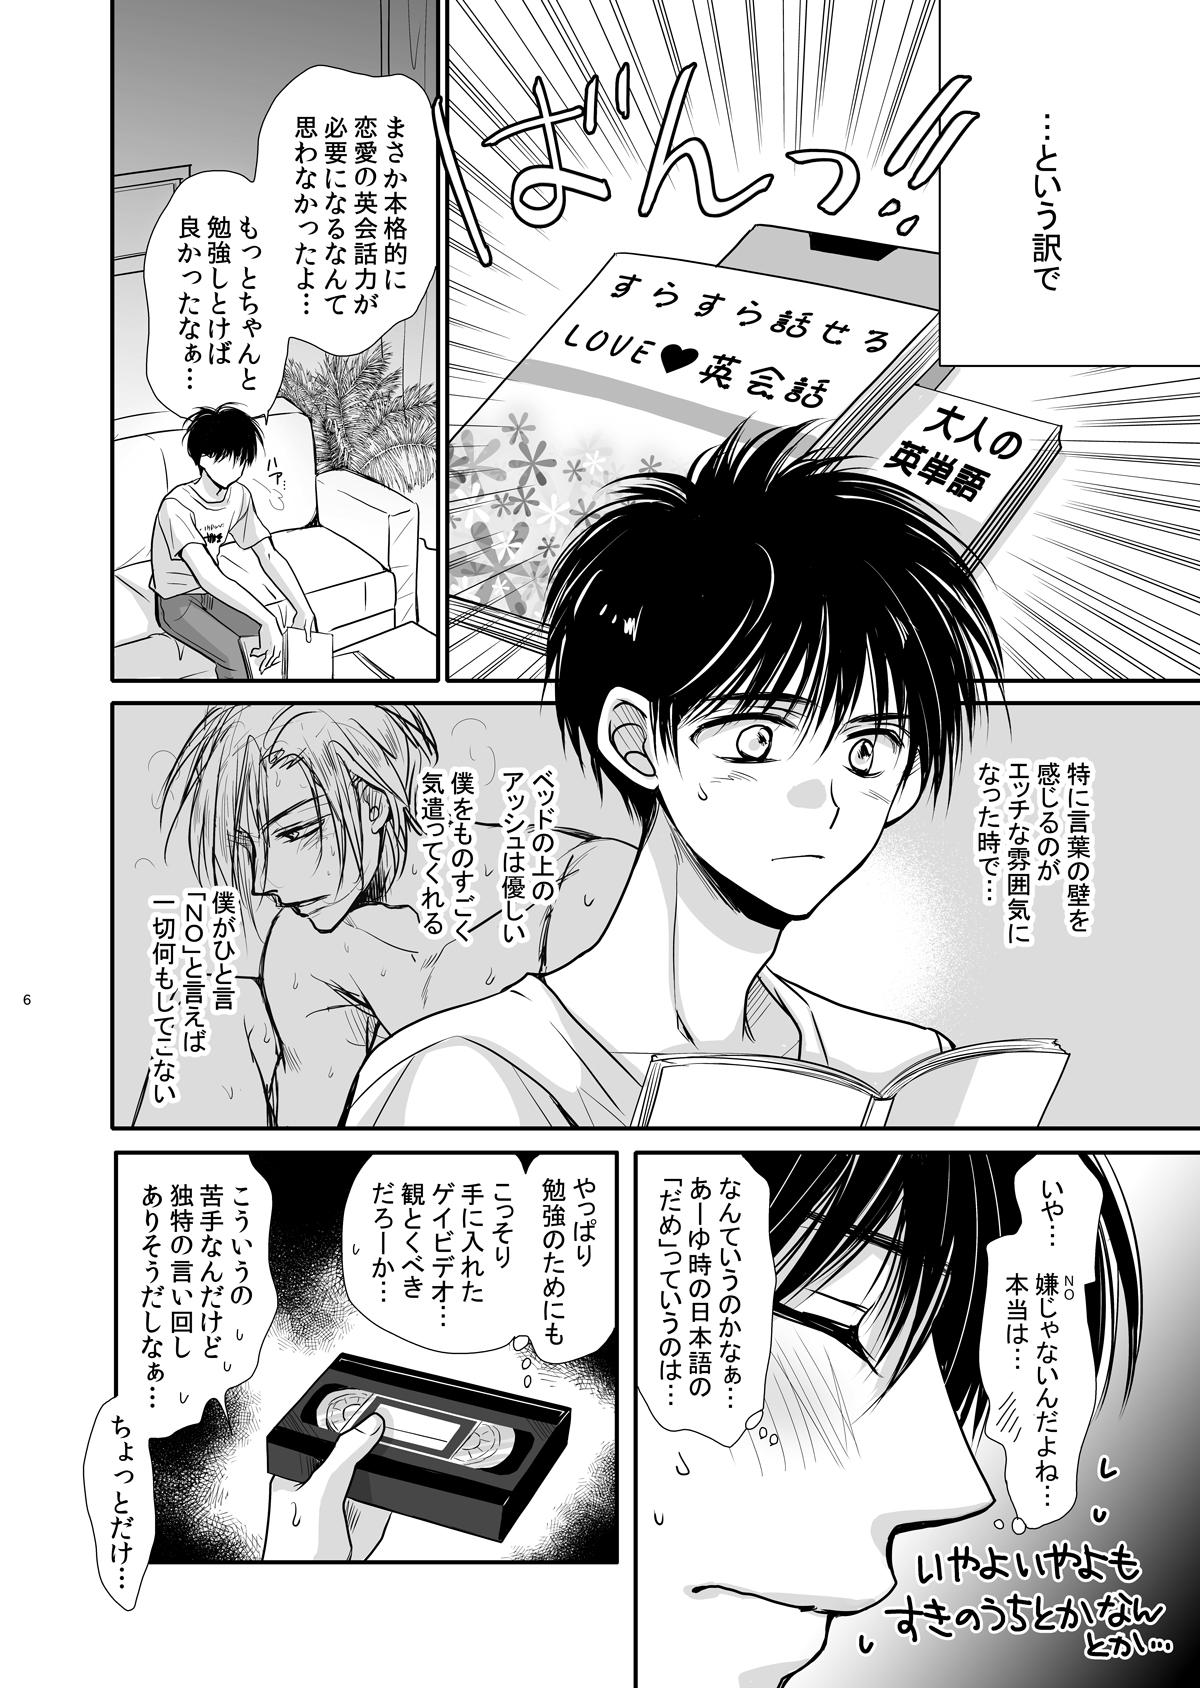 Chastity Private Lesson - Banana fish Gay Sex - Page 5